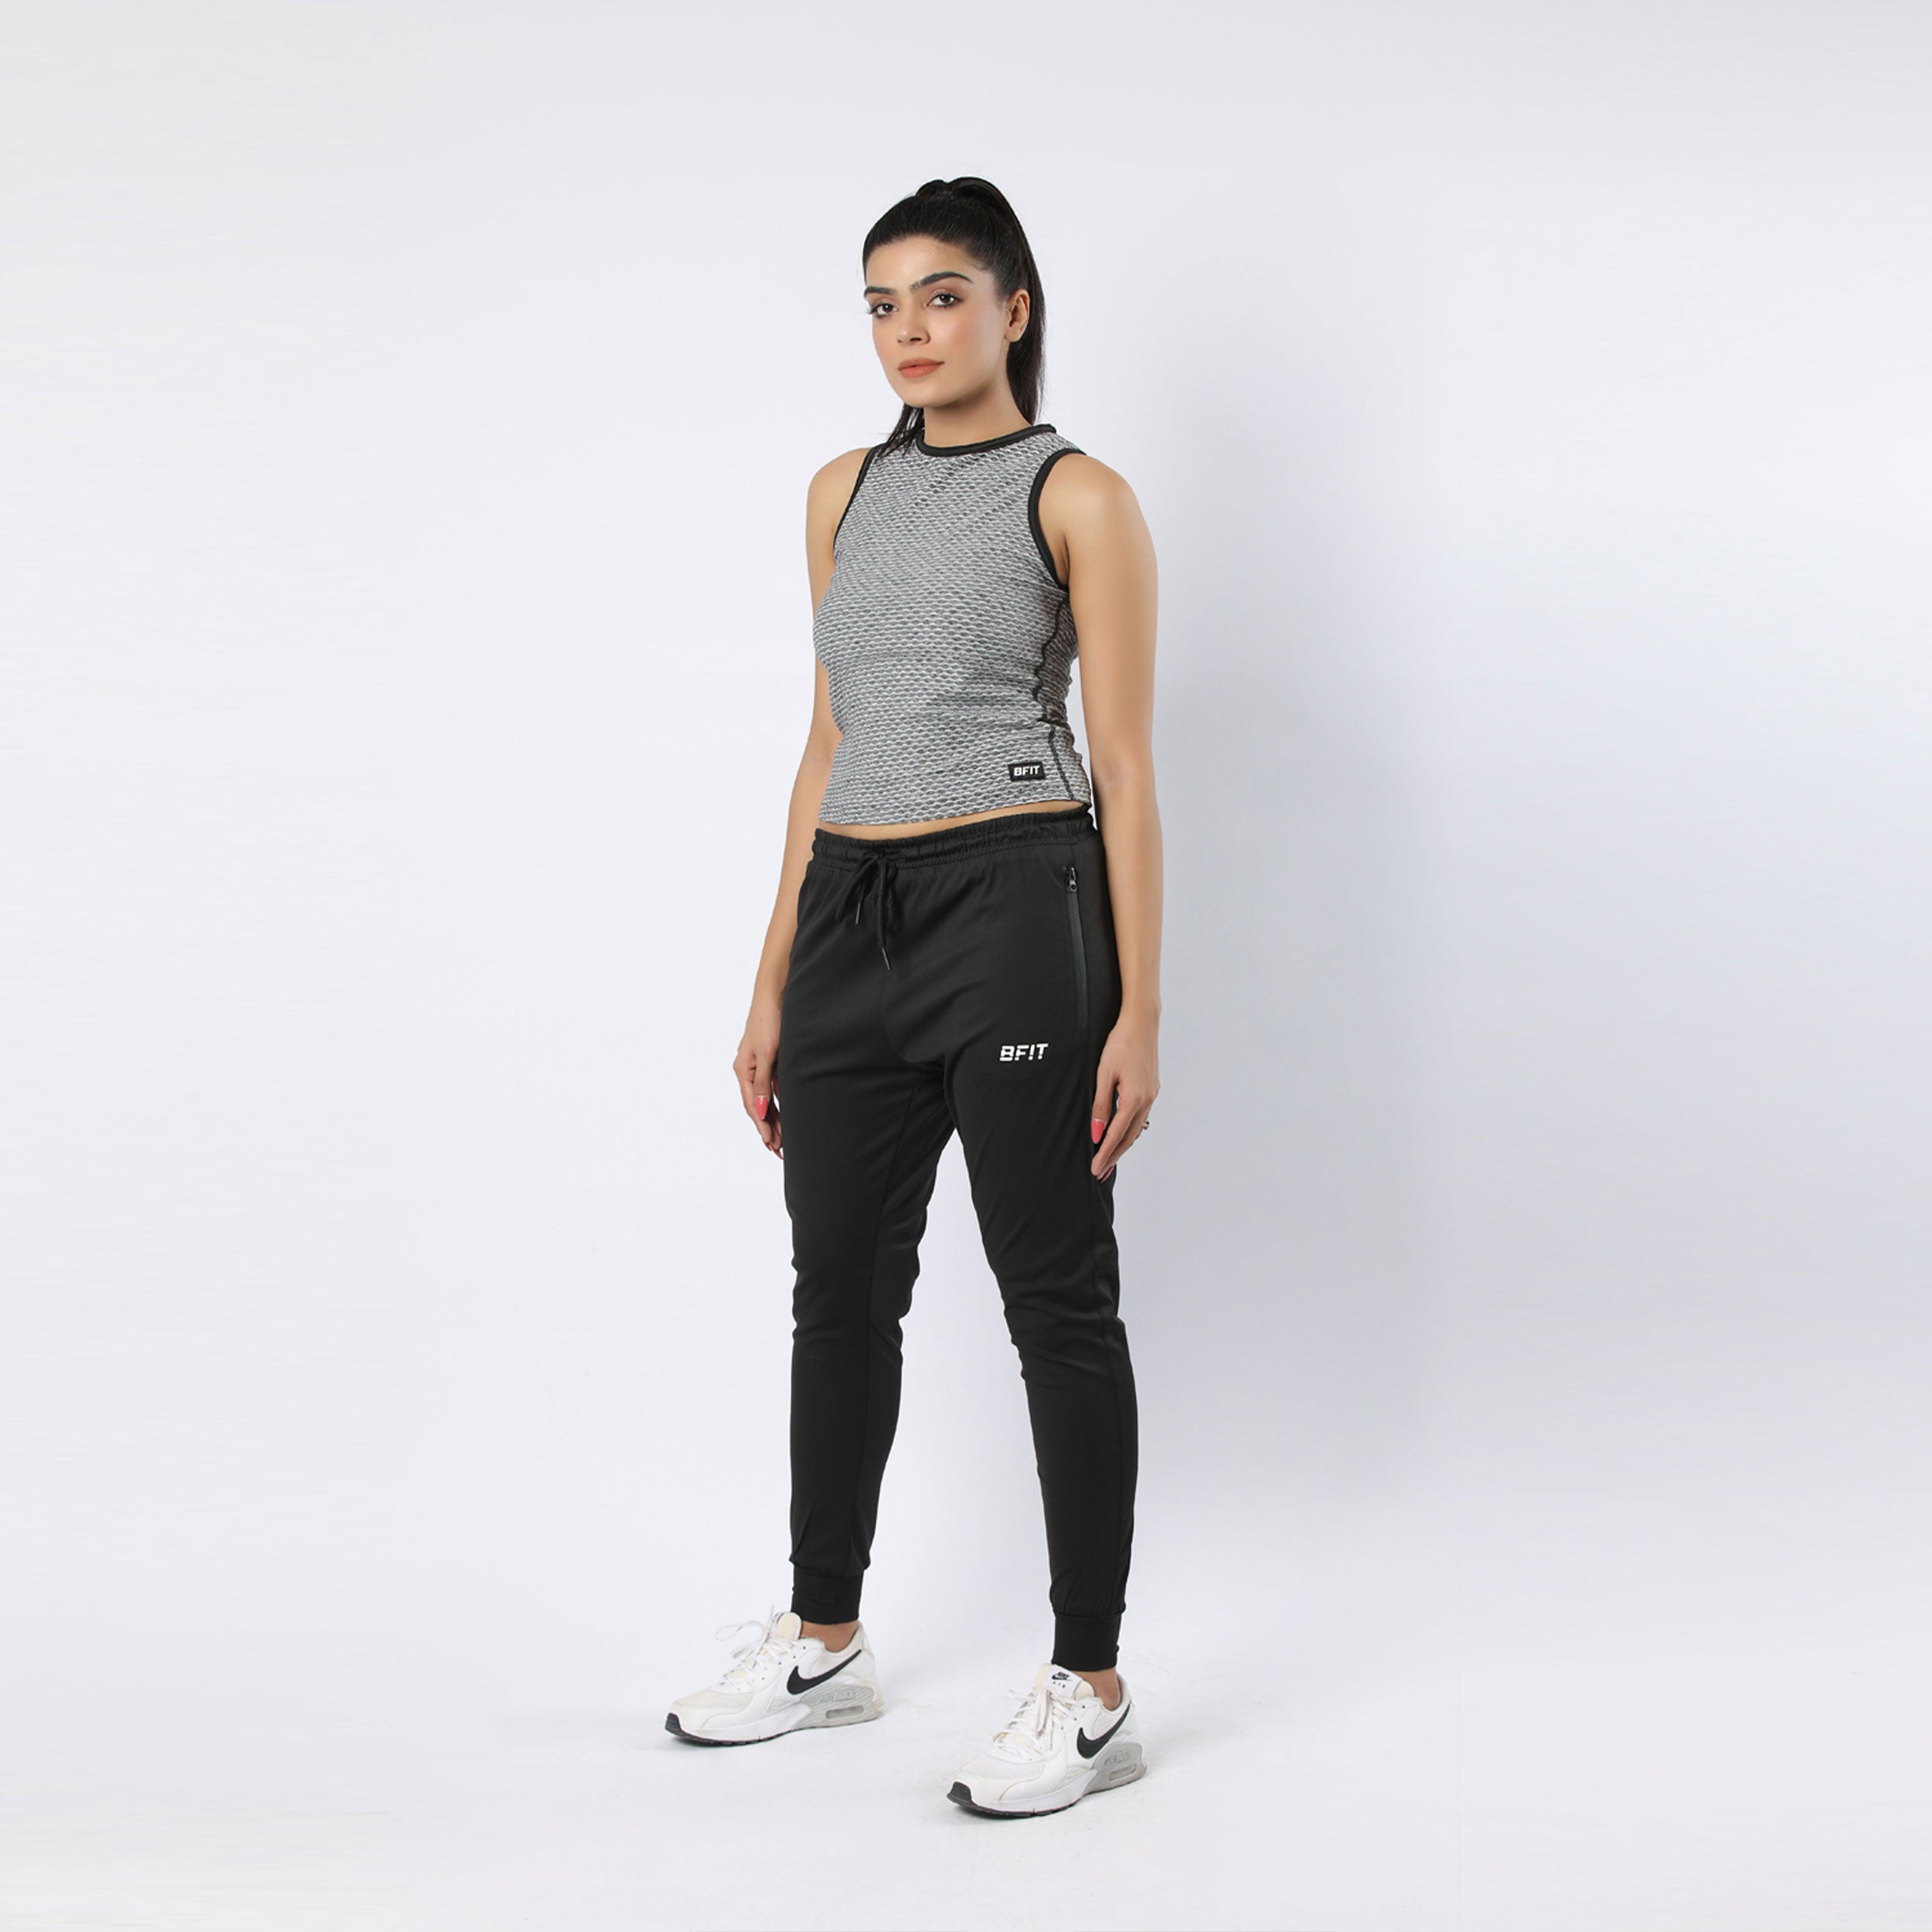 Cropped Stretchy Tank Top